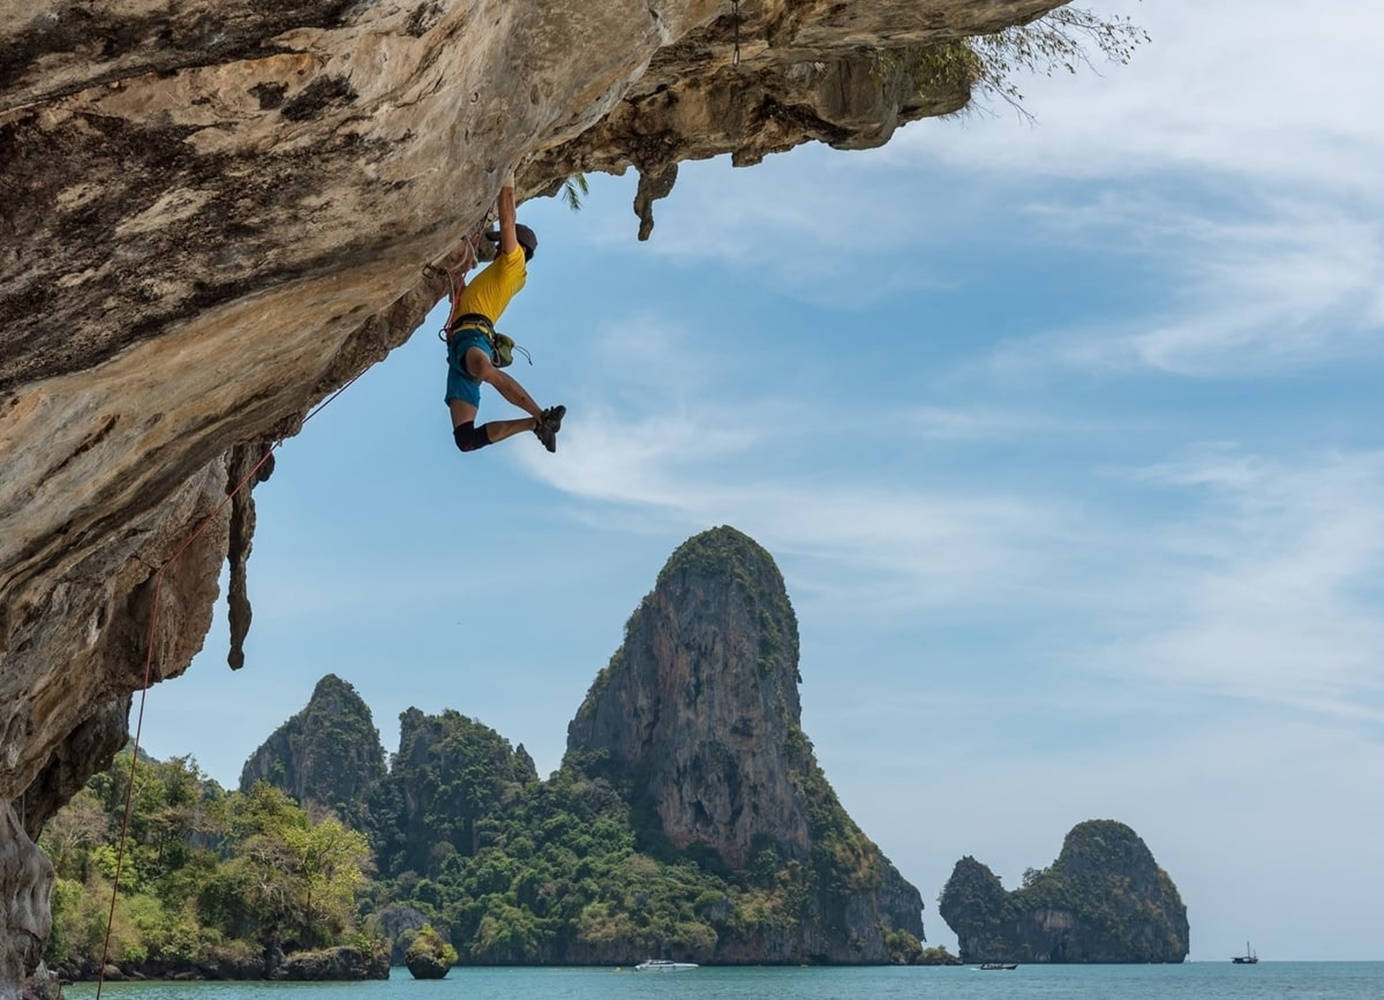 "Challenging the Heights: An Exhilarating Display of Sport Climbing" Wallpaper